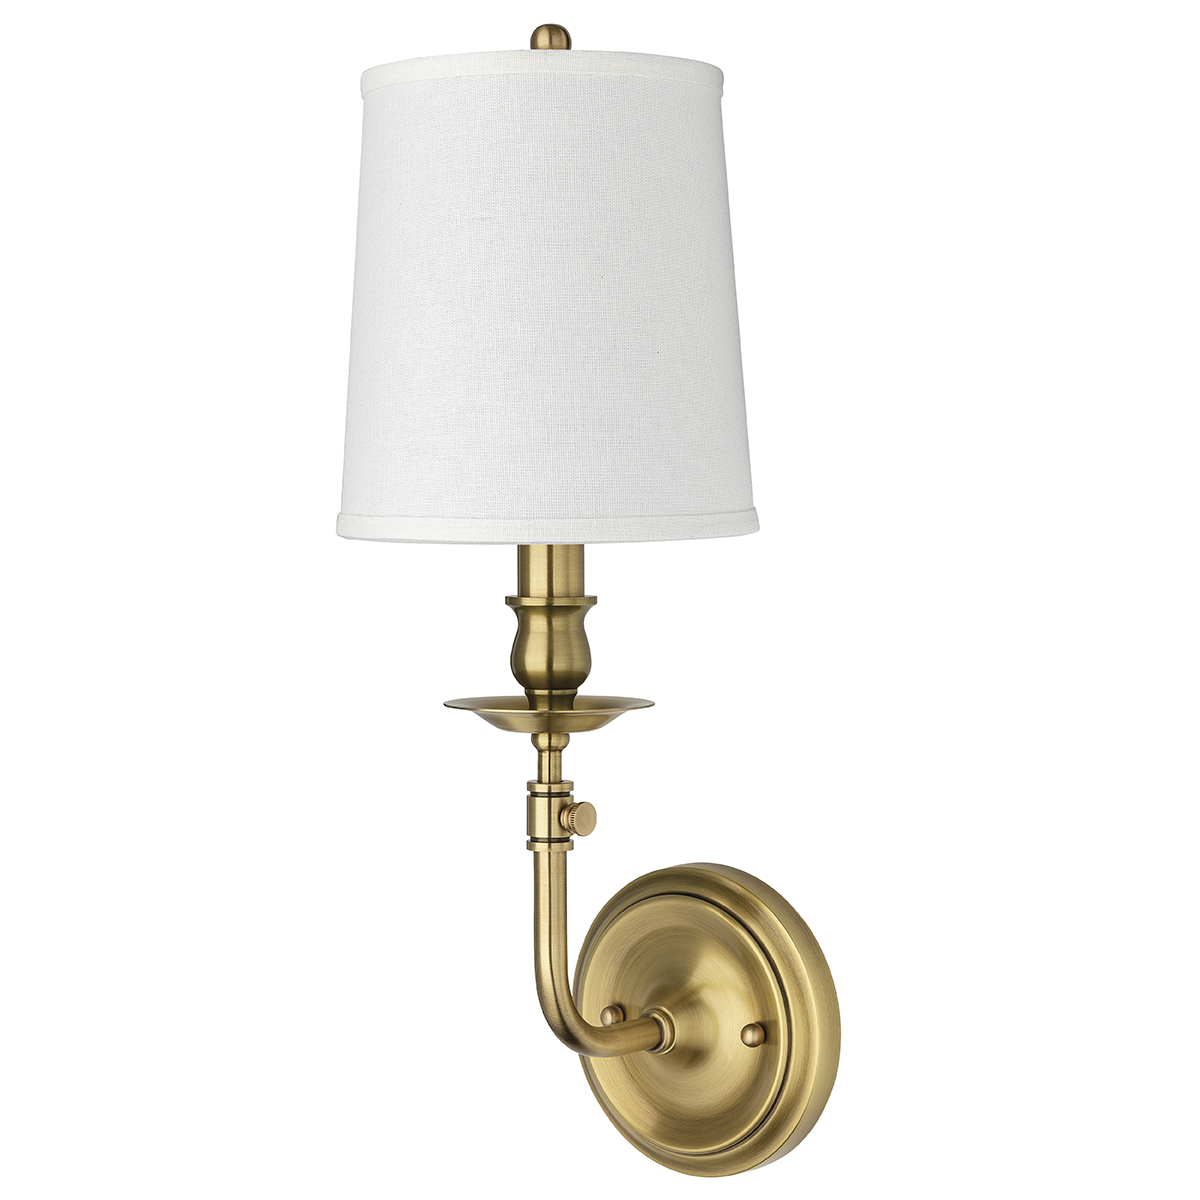 Logan 1 Light Wall Sconce-Hudson Valley-HVL-171-AGB-Wall LightingAged Brass-1-France and Son